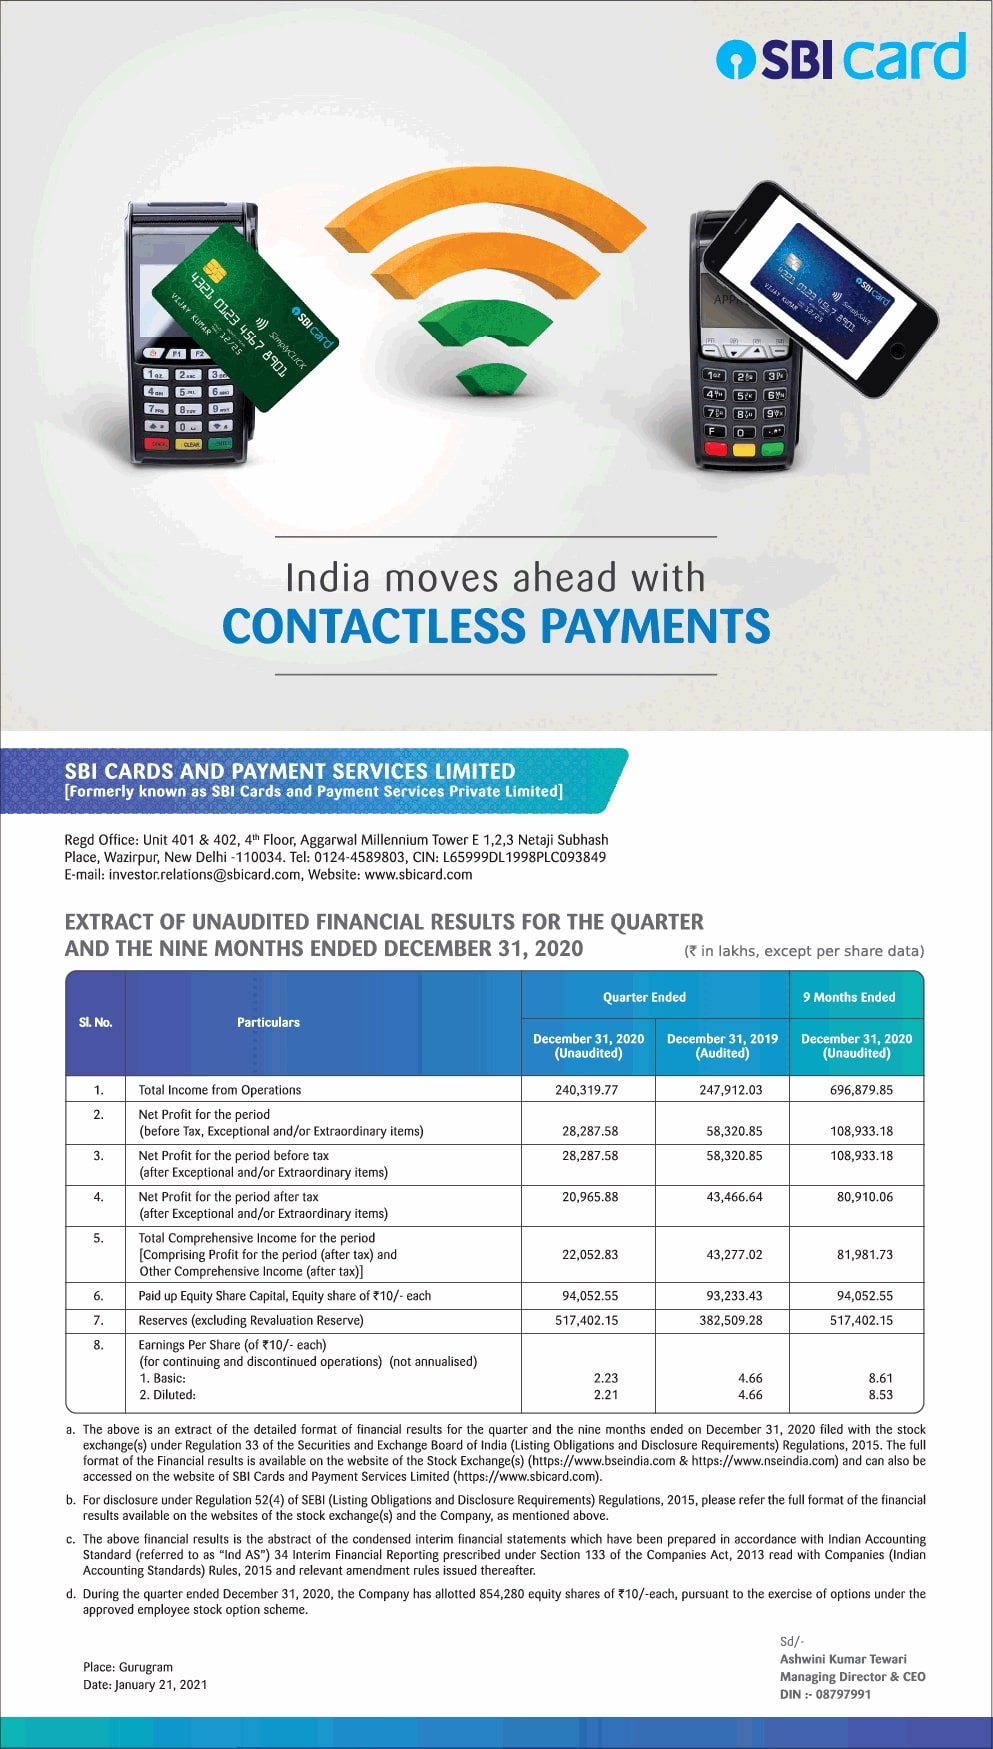 sbi-card-and-payment-services-limited-contactless-payments-ad-times-of-india-mumbai-23-01-2021